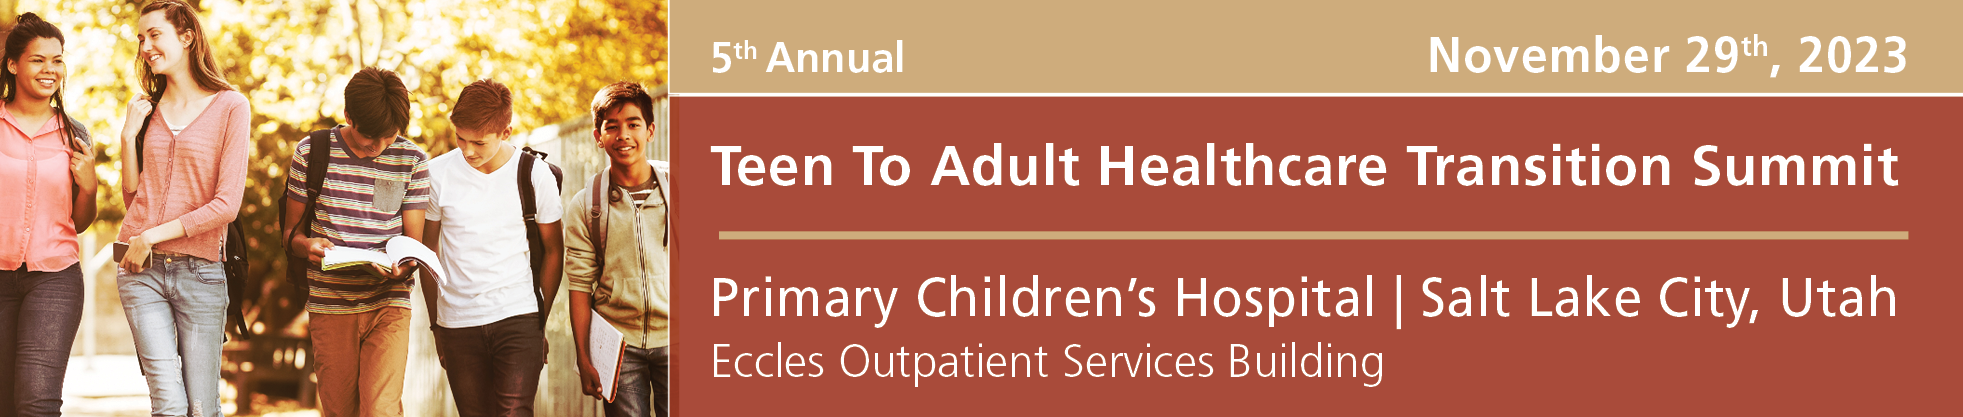 5th Annual Teen to Adult Healthcare Transition Summit Banner